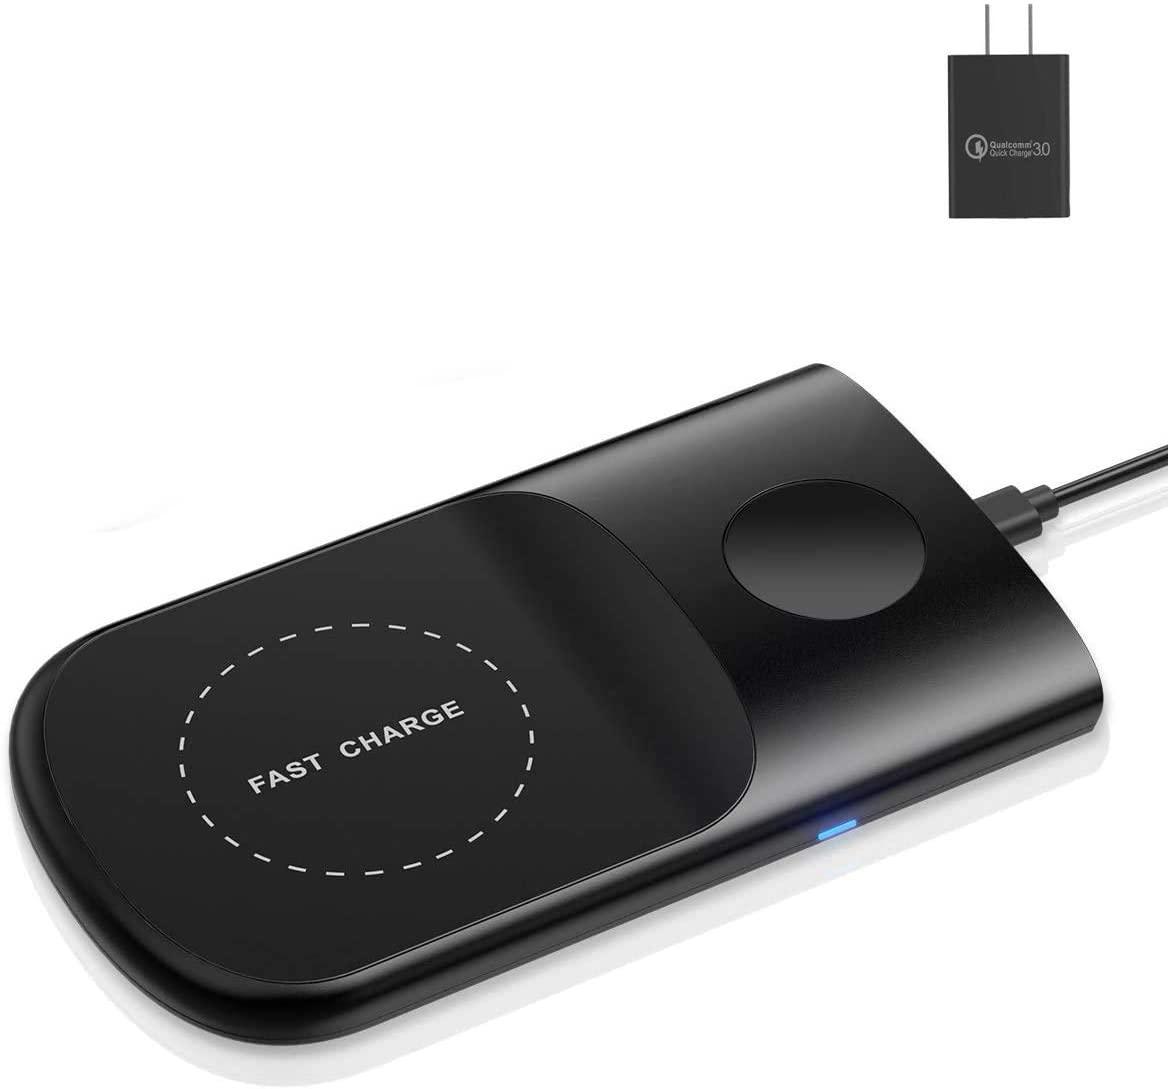 Apple iPhone Airpods Watch HoRiMe 2-in-1 Wireless Charging Pad for $9.25